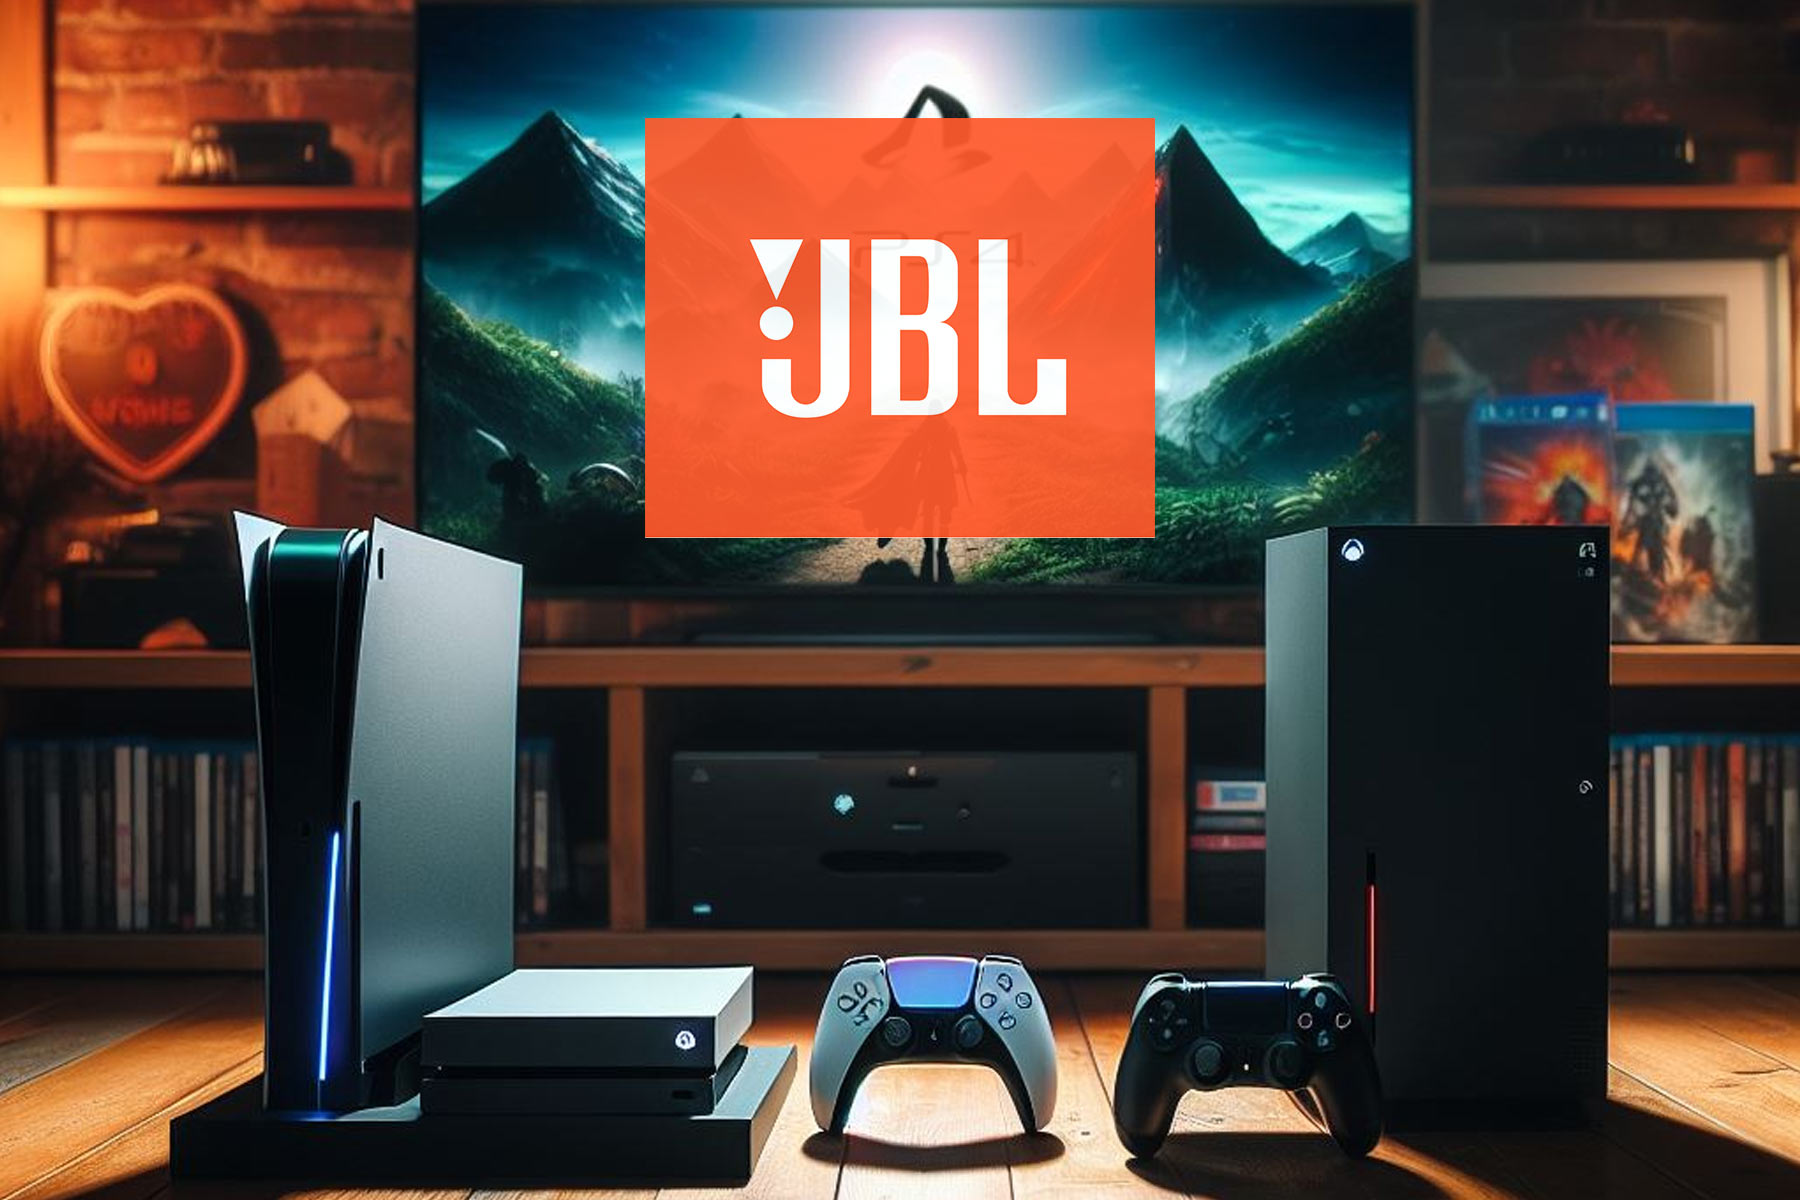 Get ready for immersive gaming on Xbox and Playstation with JBL Quantum headsets